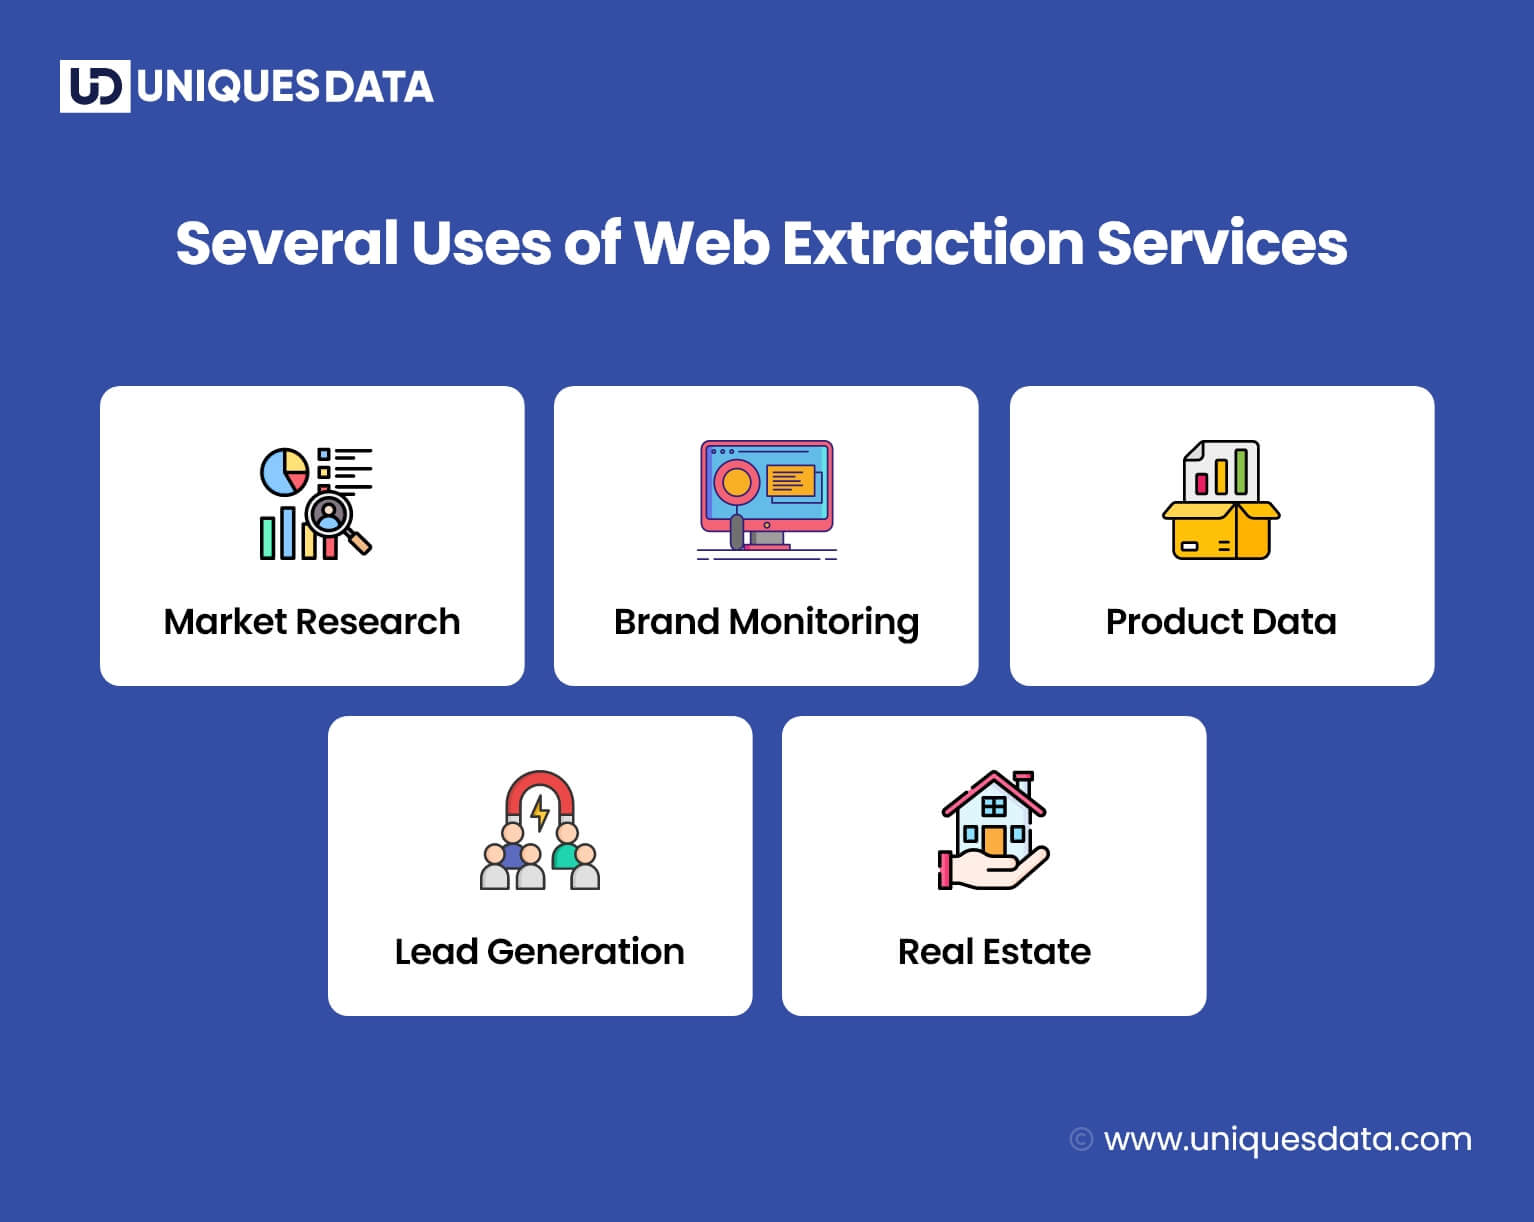 Several Uses of Web Extraction Services